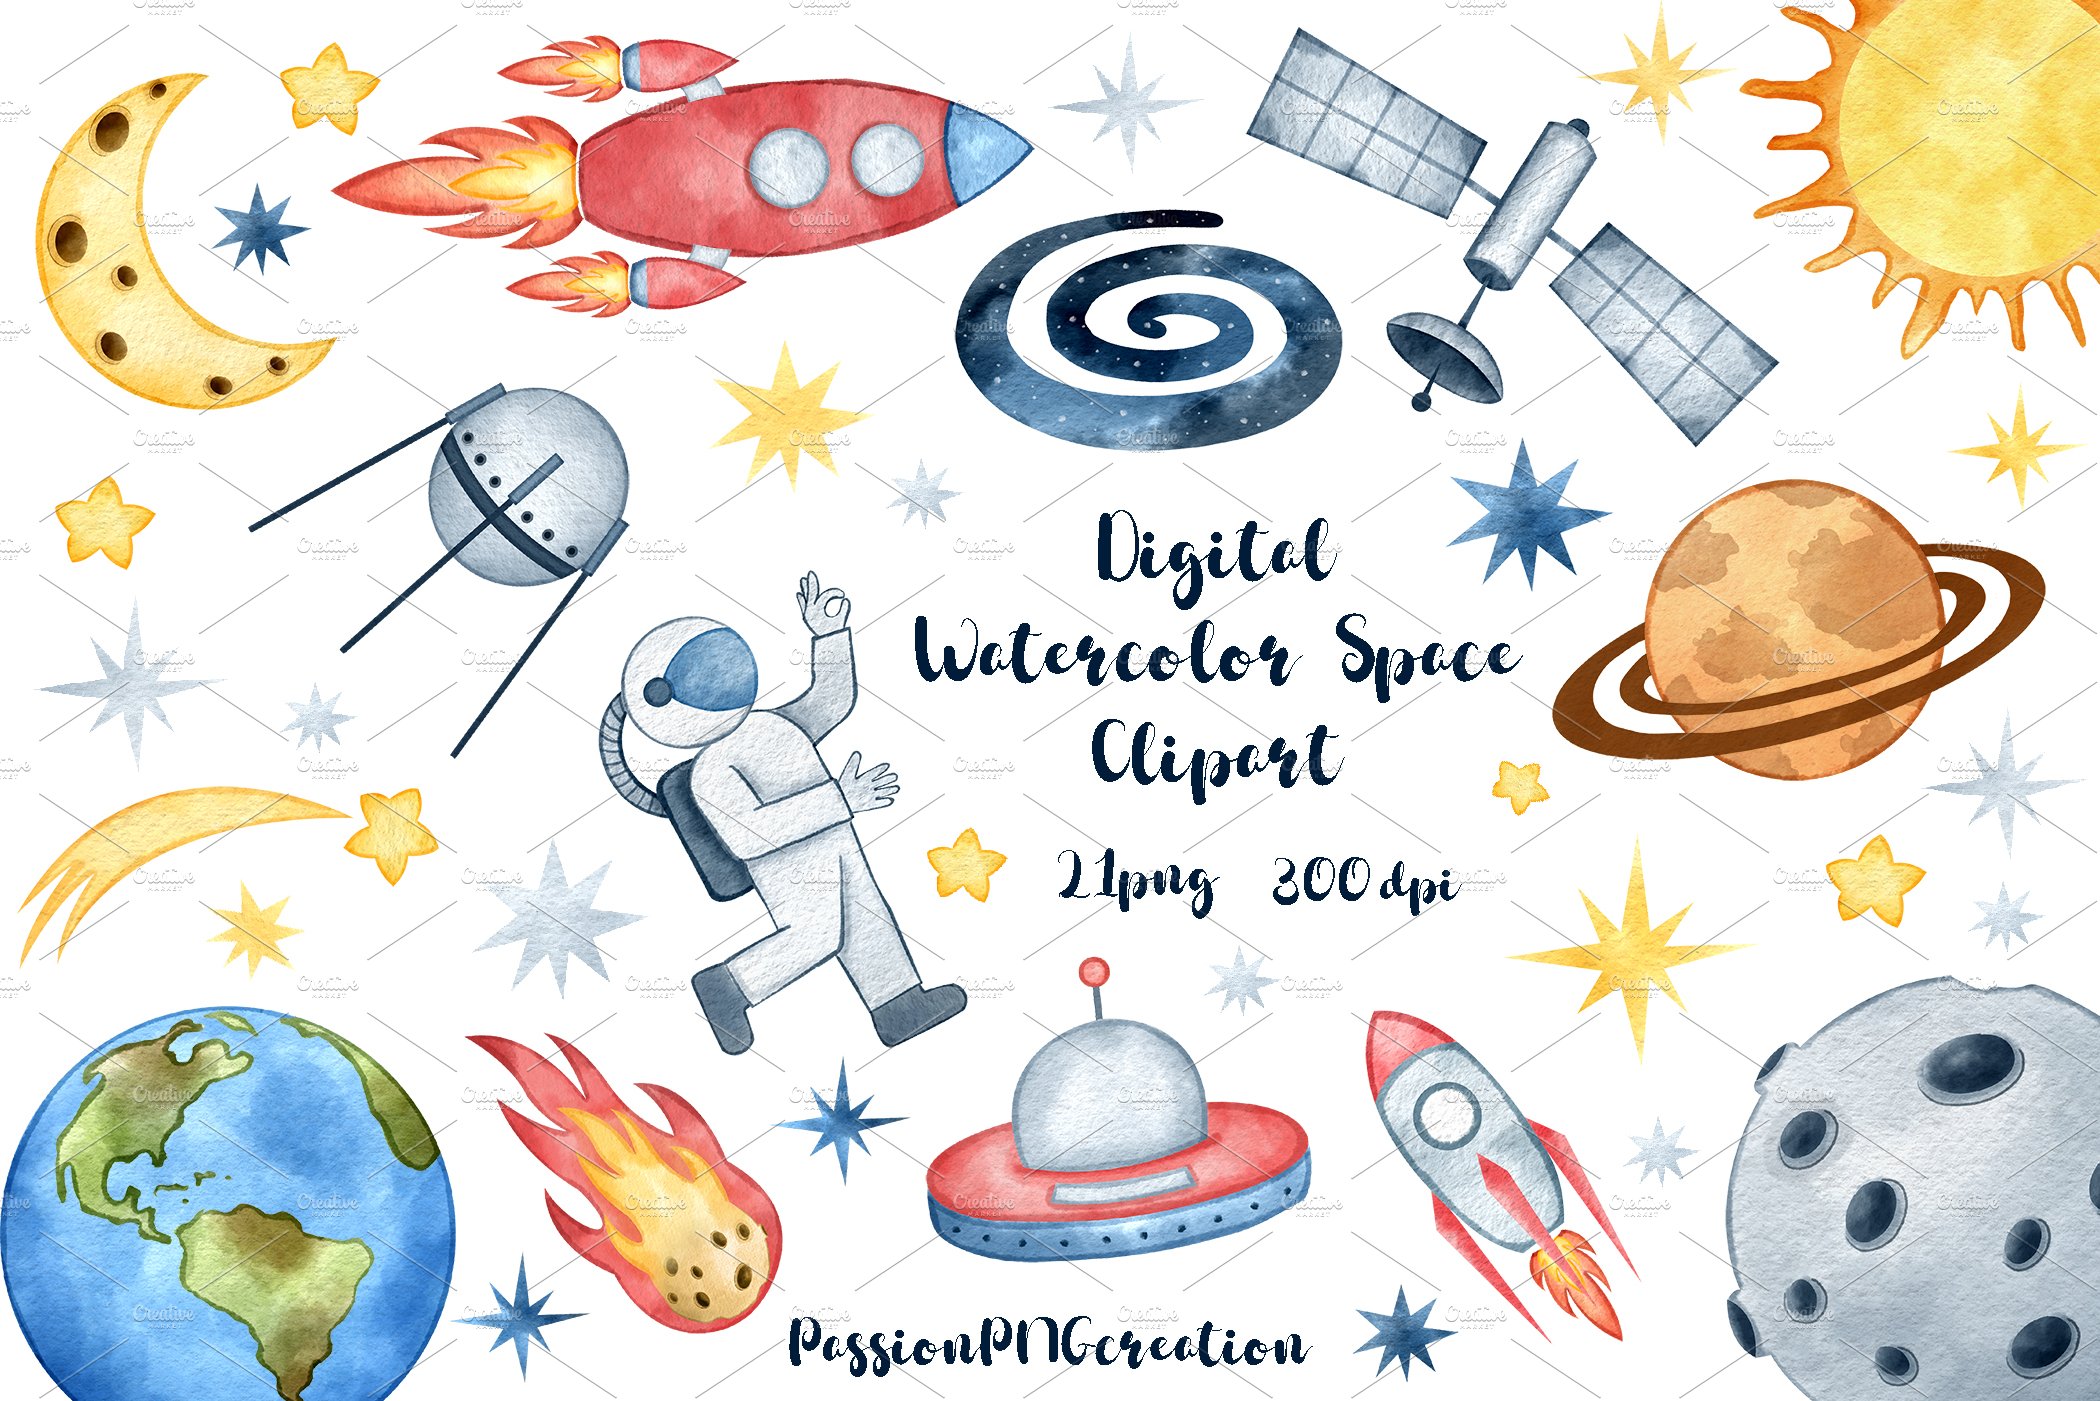 Digital Watercolor Space Clipart preview image.